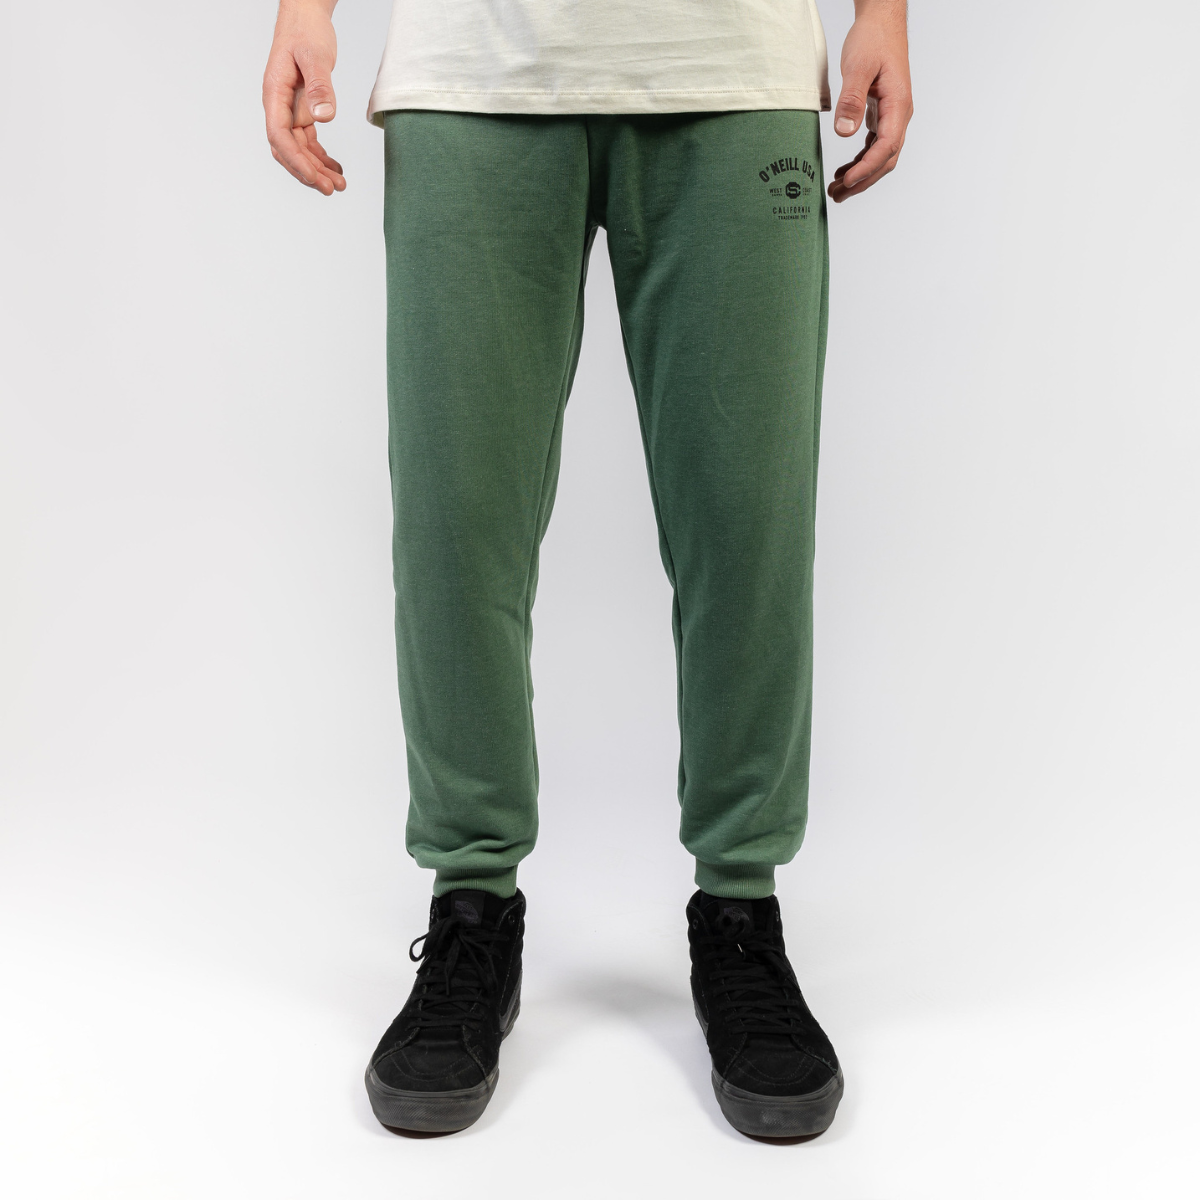 BUZO HOMBRE - STATE JOGGER PANT - DEEP LICHEN GREEN  - IN87